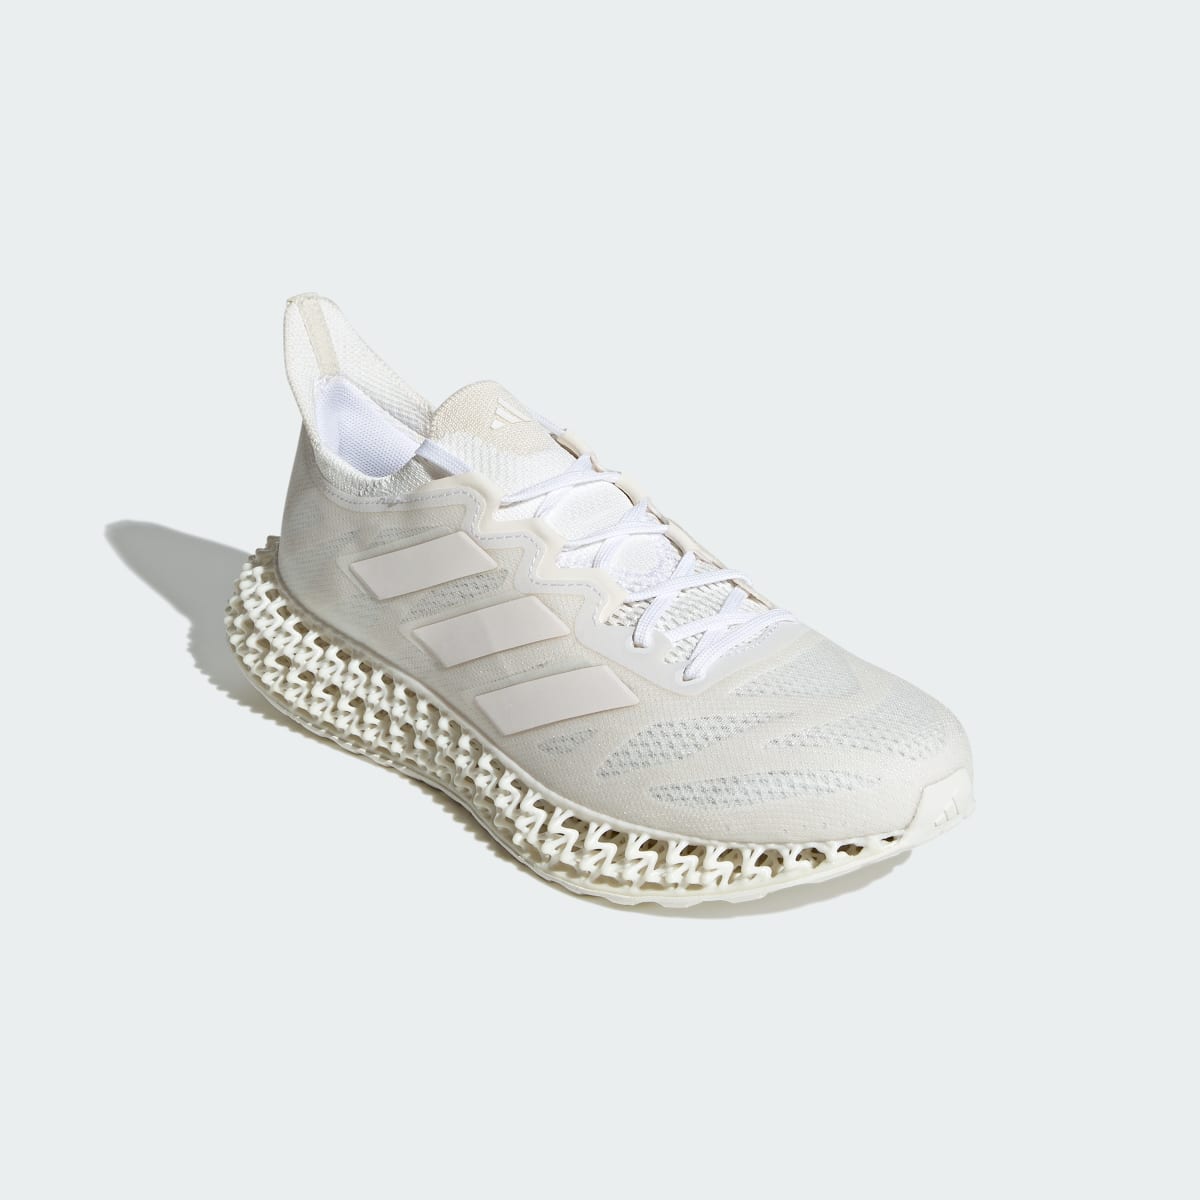 Adidas 4DFWD 3 Running Shoes. 7